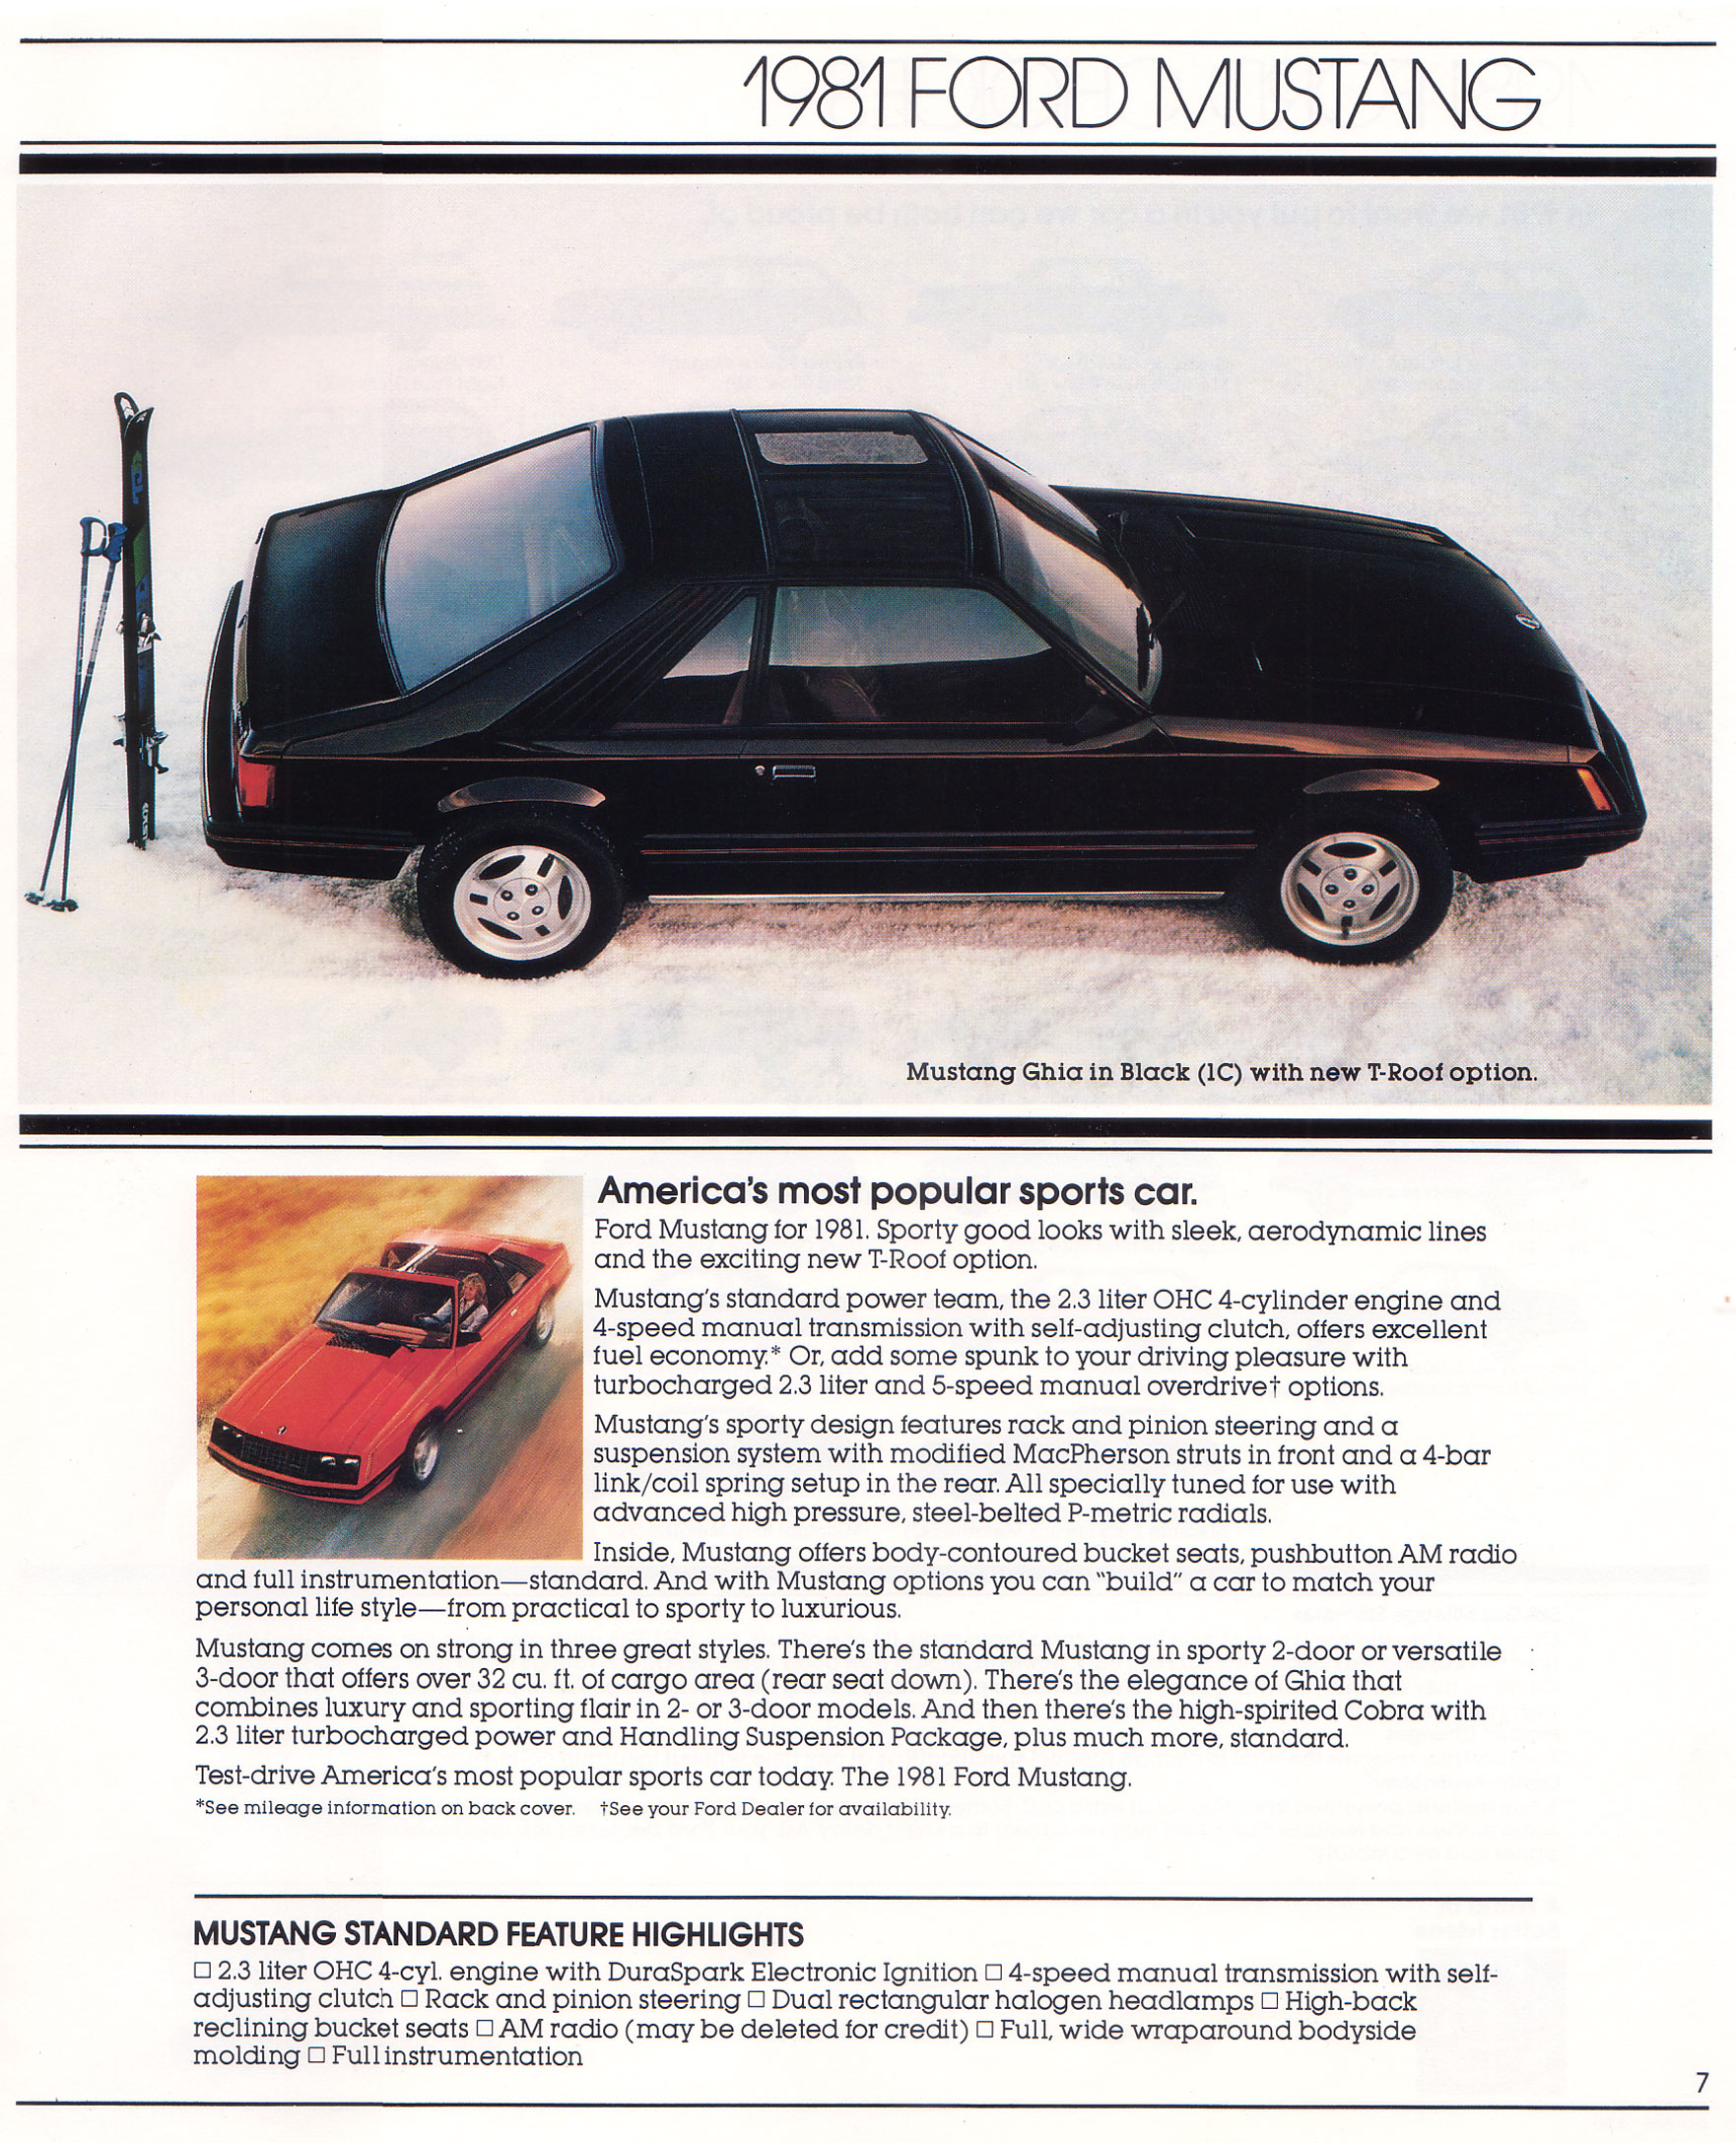 1981_Ford_Better_Ideas-07